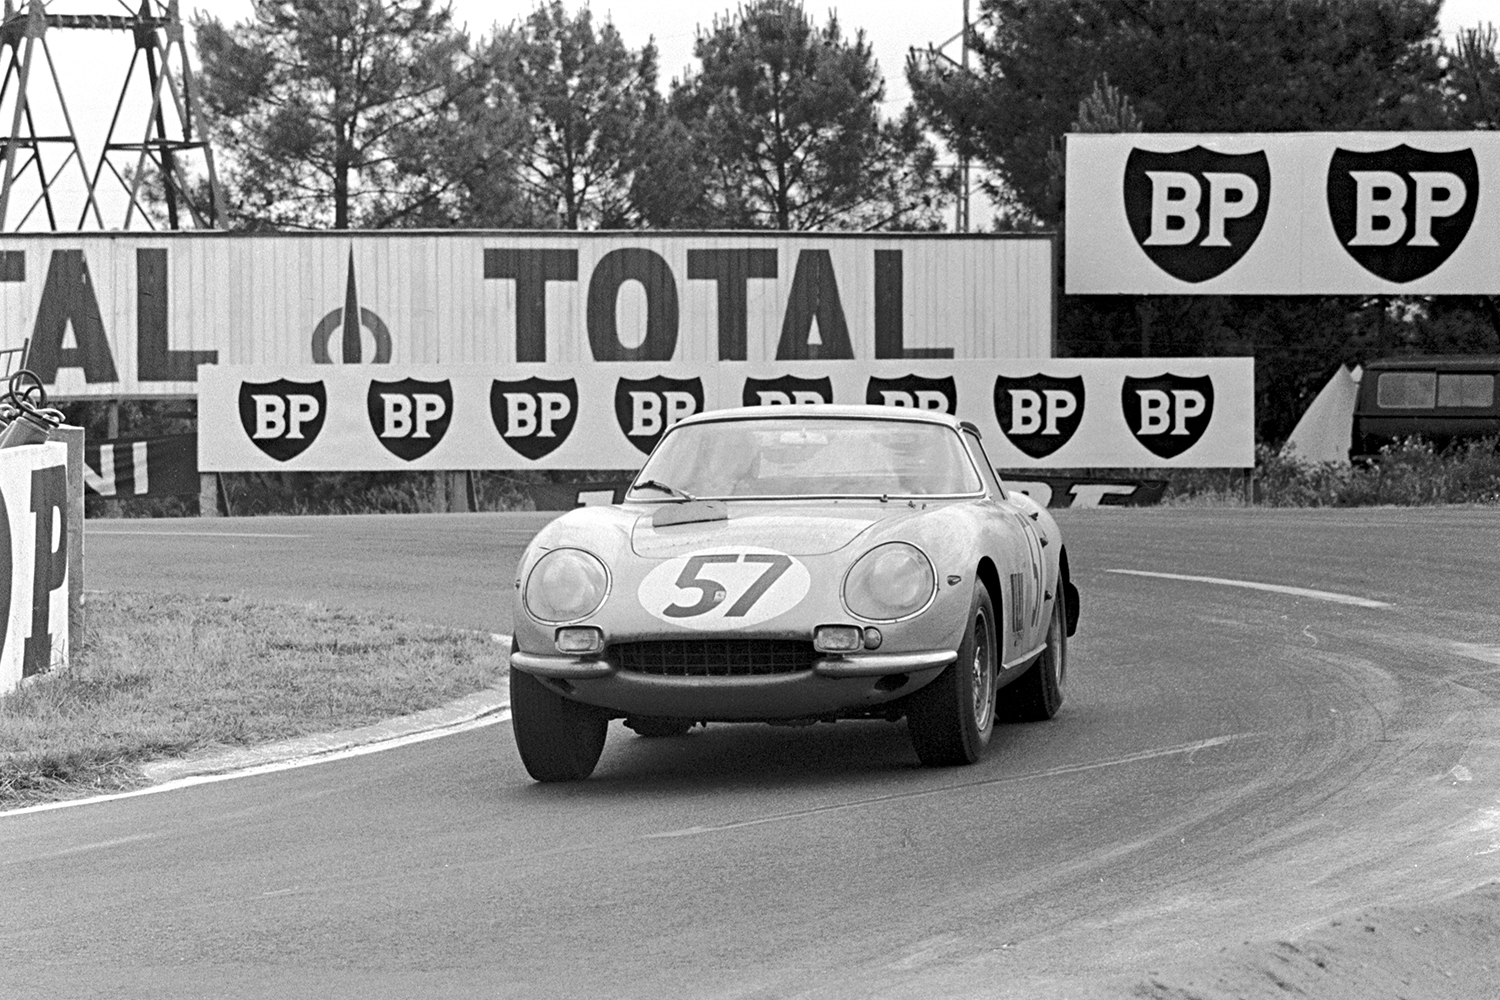 <strong>Ferrari 275 GTB/C</strong><br><strong>Car numbers:</strong> 26, 29 and 57<br>While none of the official Ferrari team cars finished, two of these competition versions of the 275 GTB did: No. 29 driven by Piers Courage and Roy Pike, and No. 57 driven by Pierre Noblet and Claude Dubois.